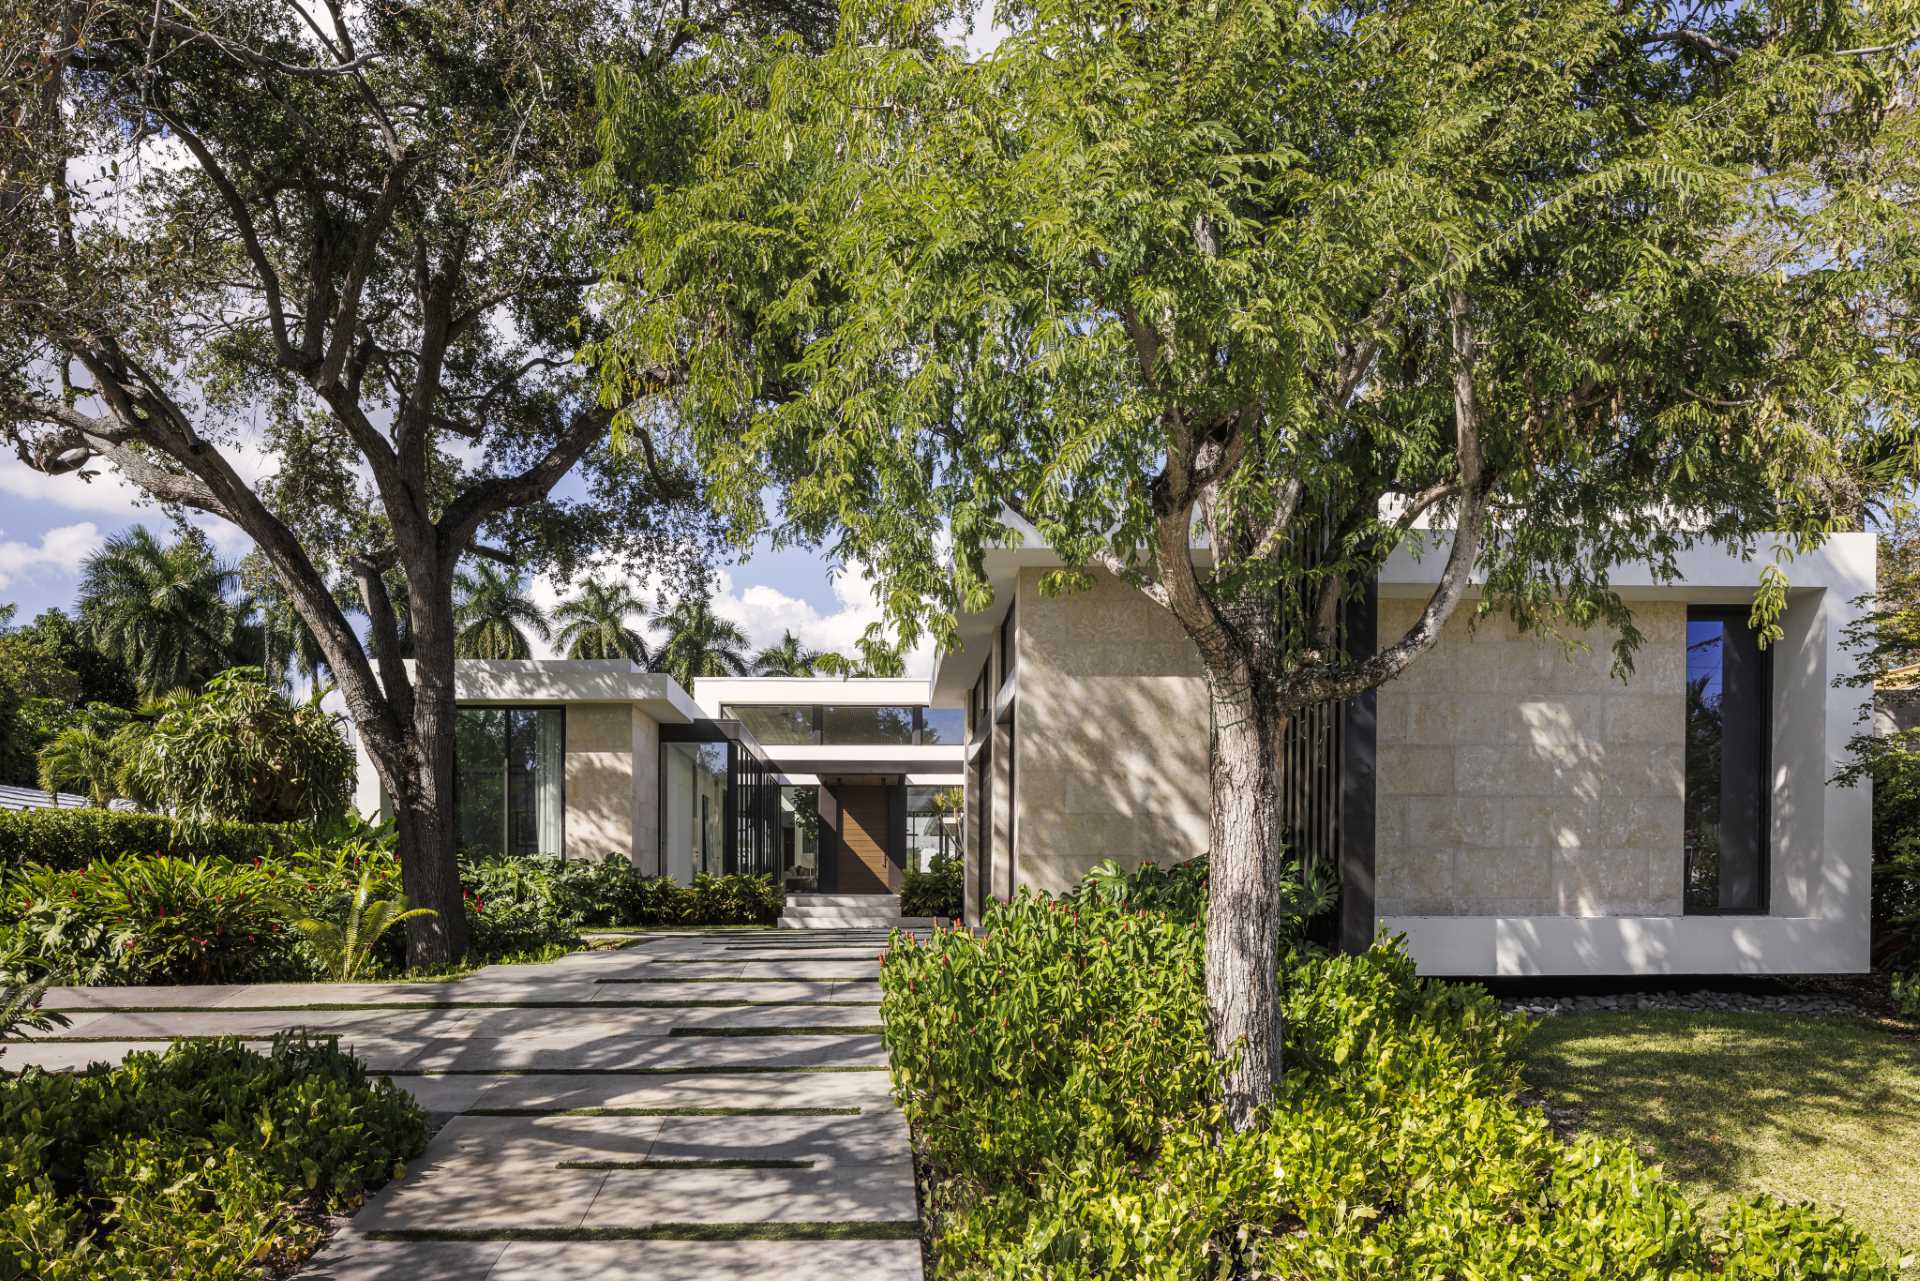 A modern home with coral stone walls.